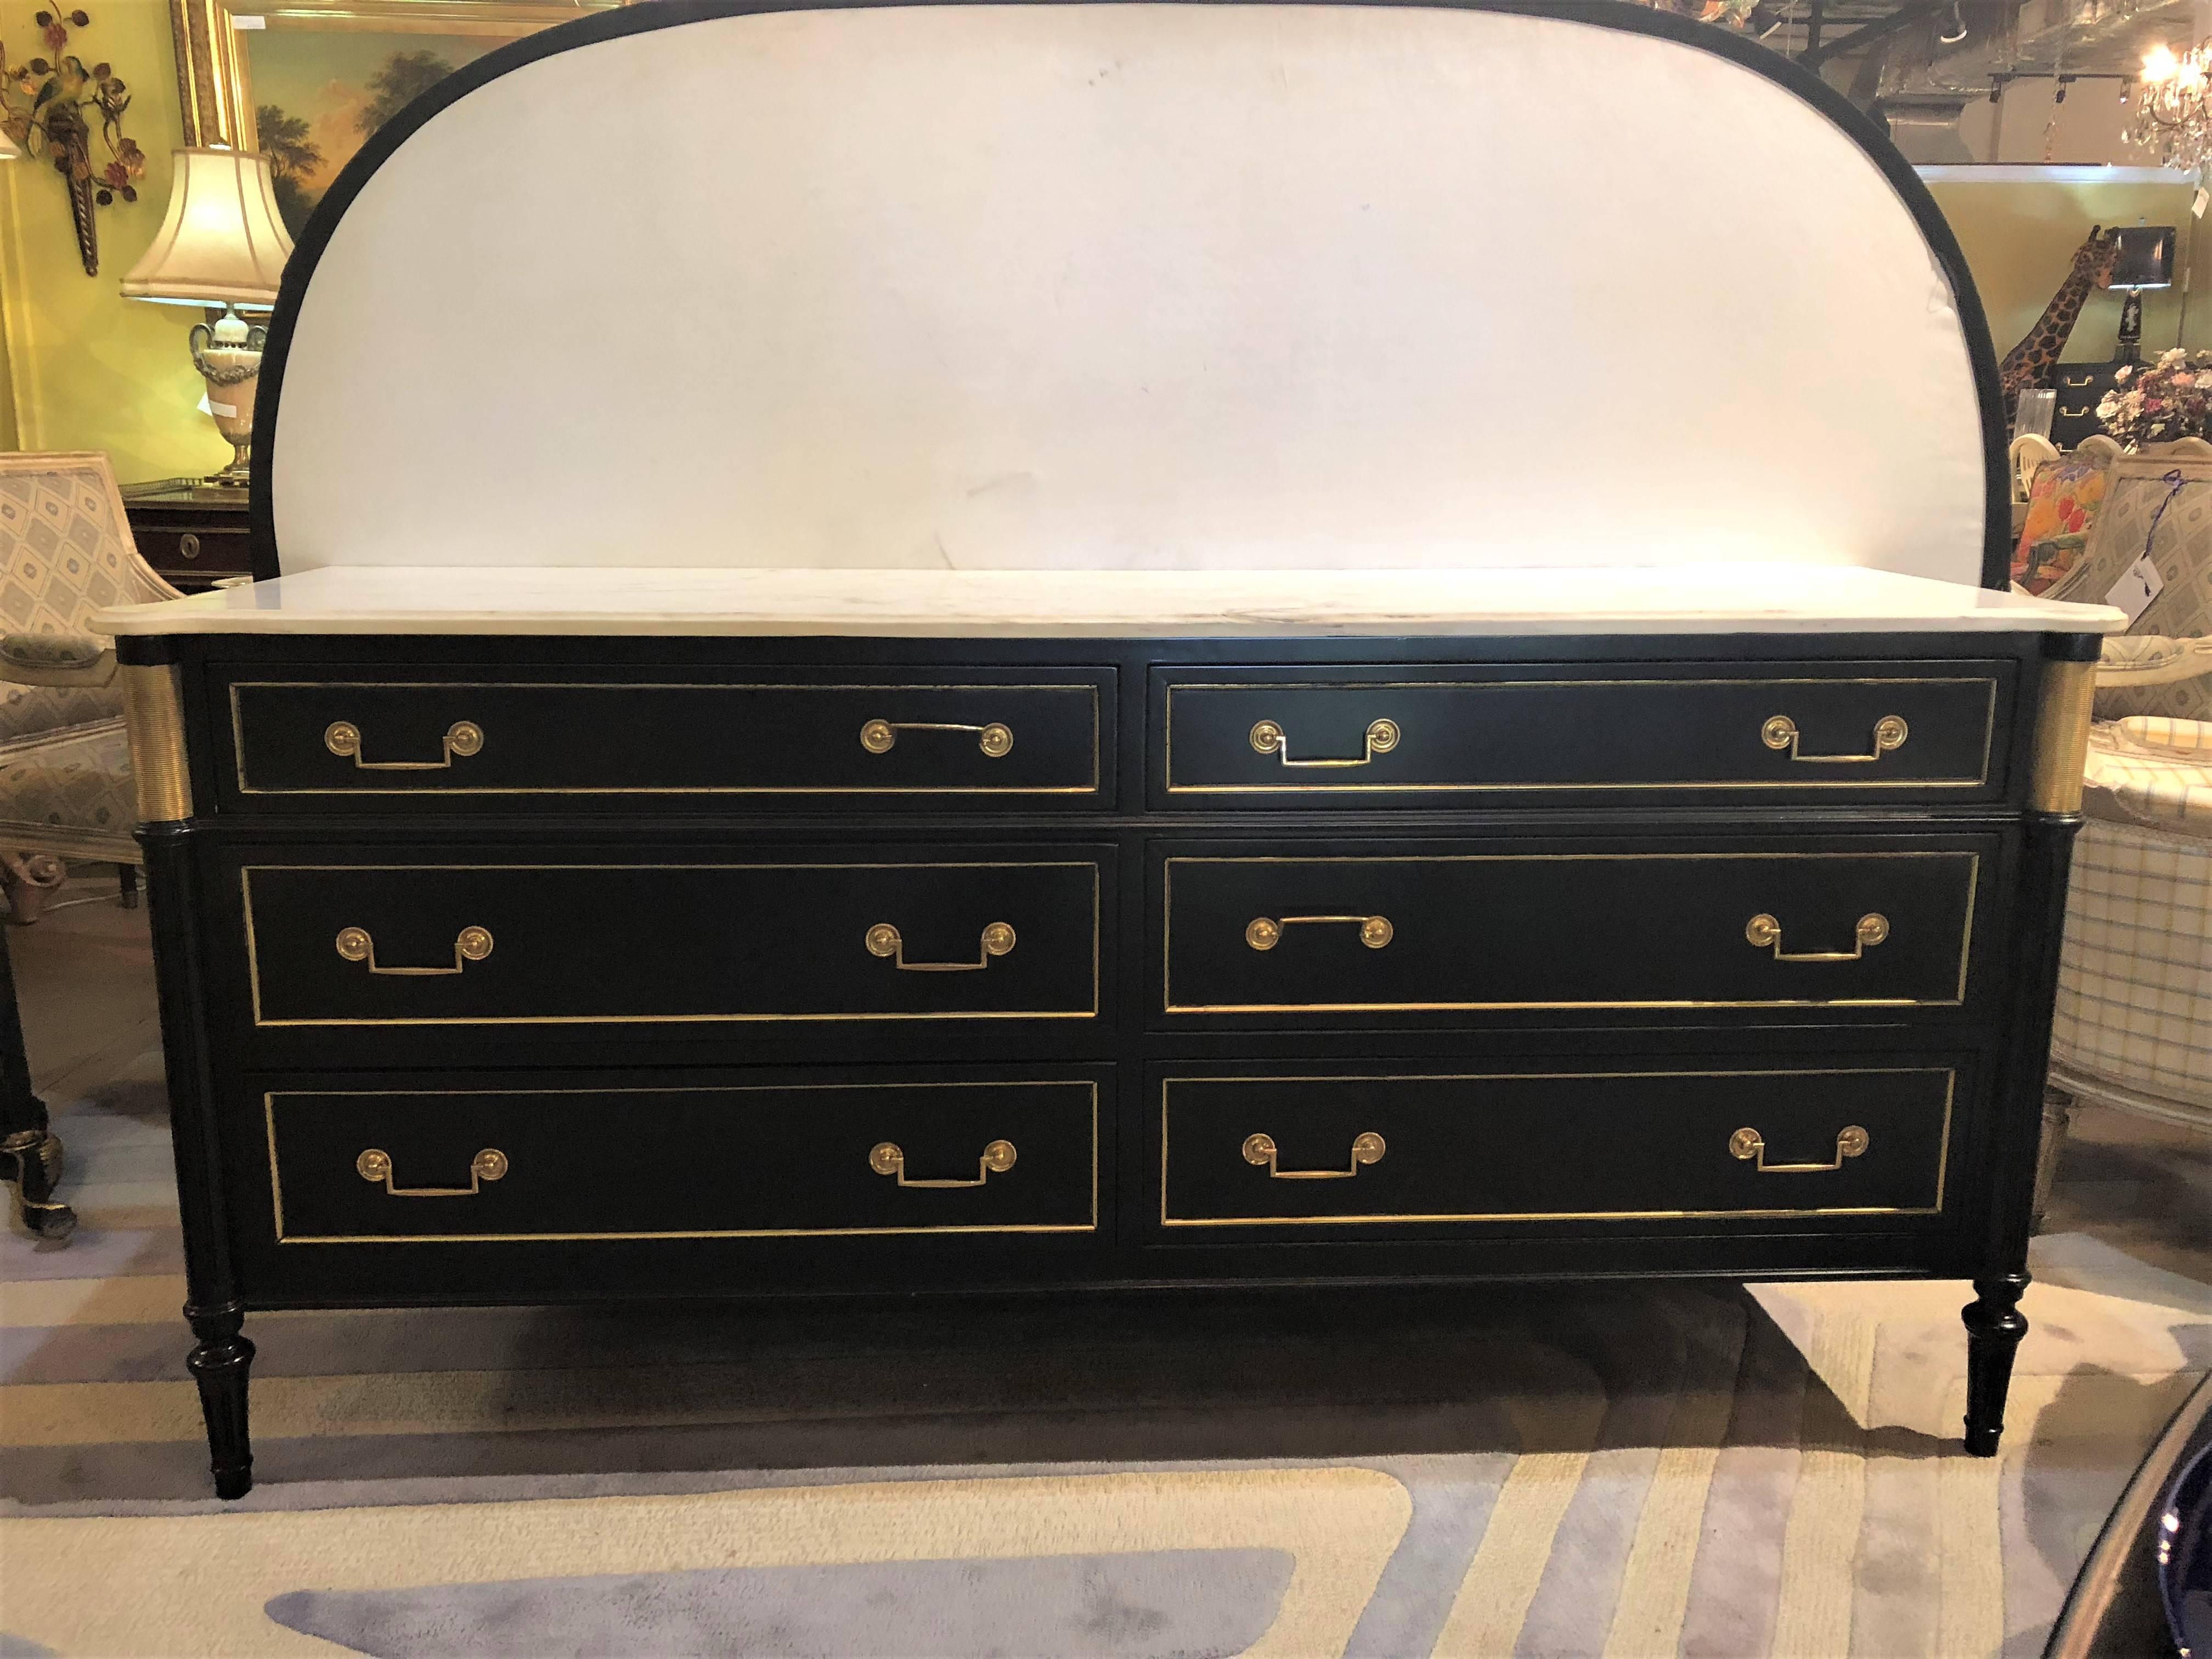 A Hollywood Regency ebony Maison Jansen Louis XVI style dresser or chest. This fine three by three bronze framed dresser or server has bronze cookie cutter corners and reeded corners on all sides. The whole supporting a white marble top with double